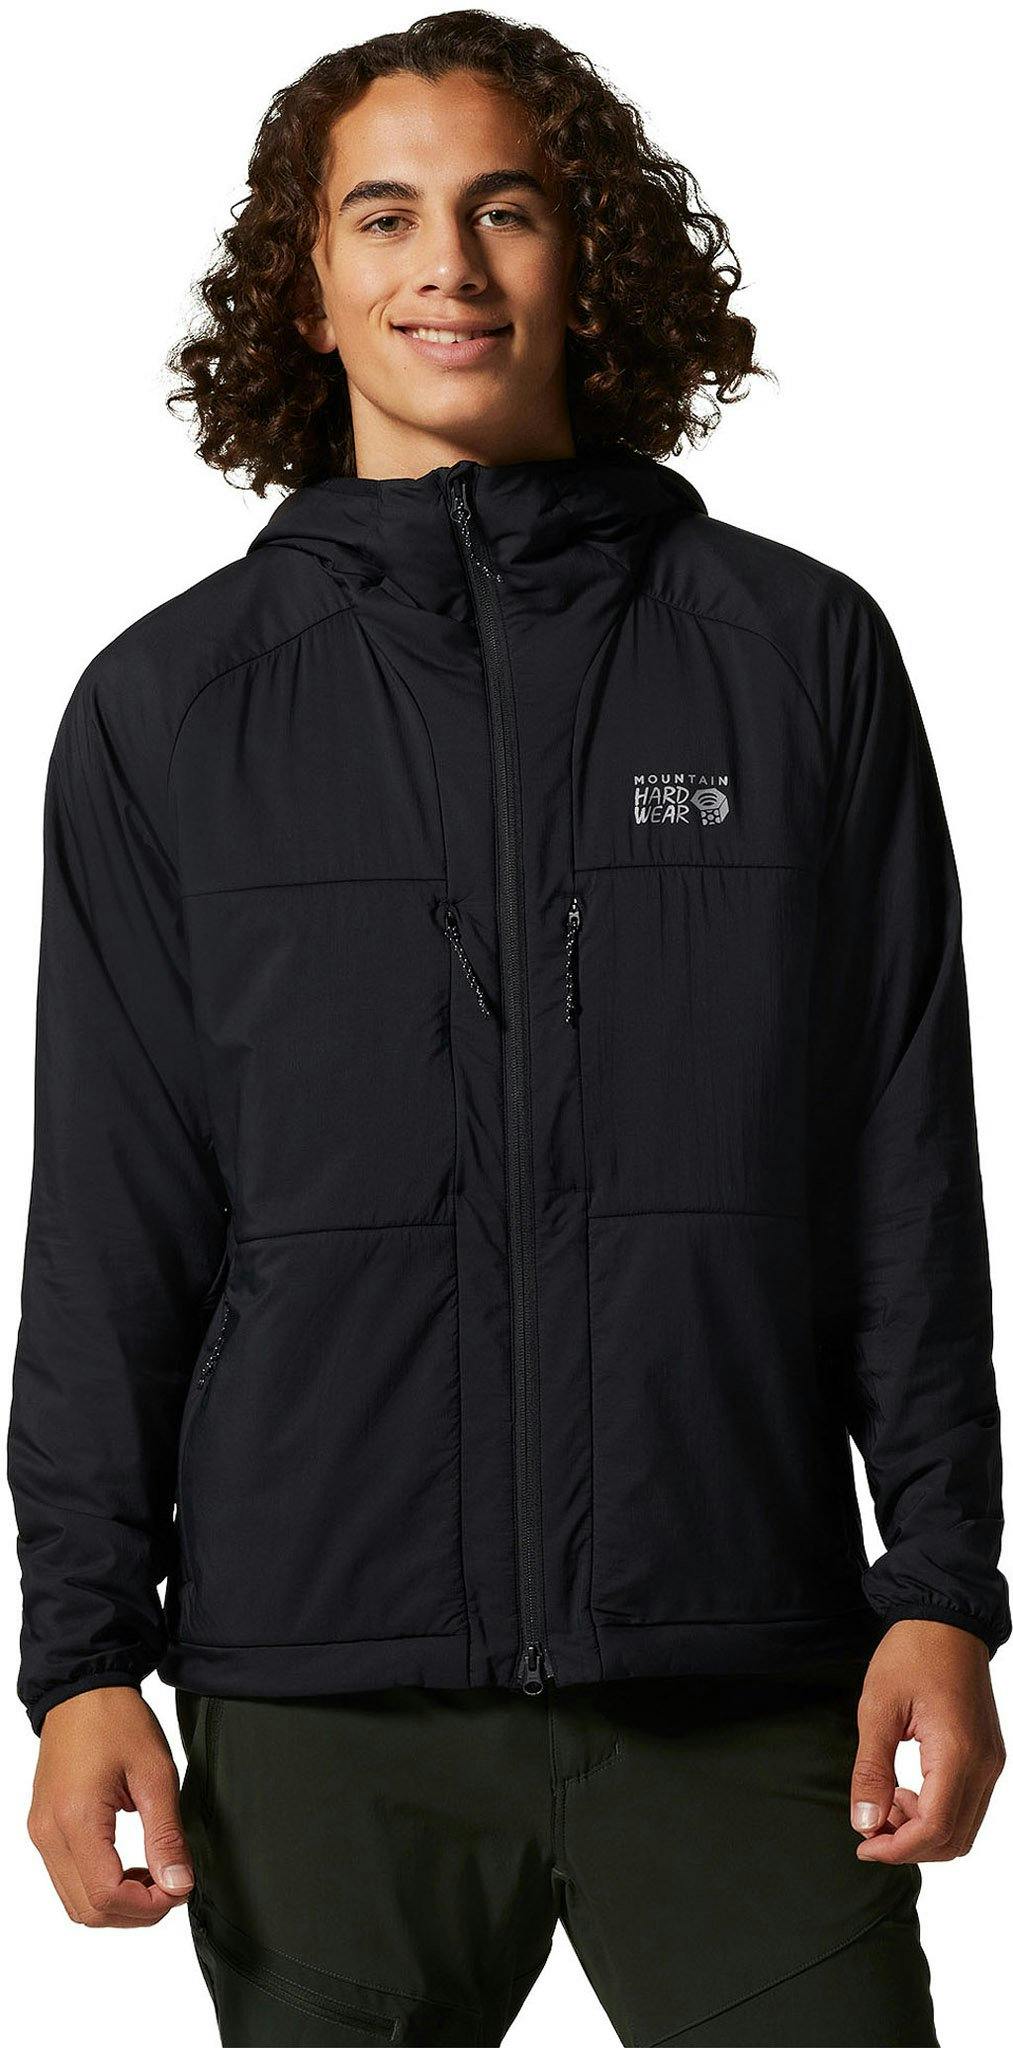 Product image for Kor Airshell Warm Jacket - Men's